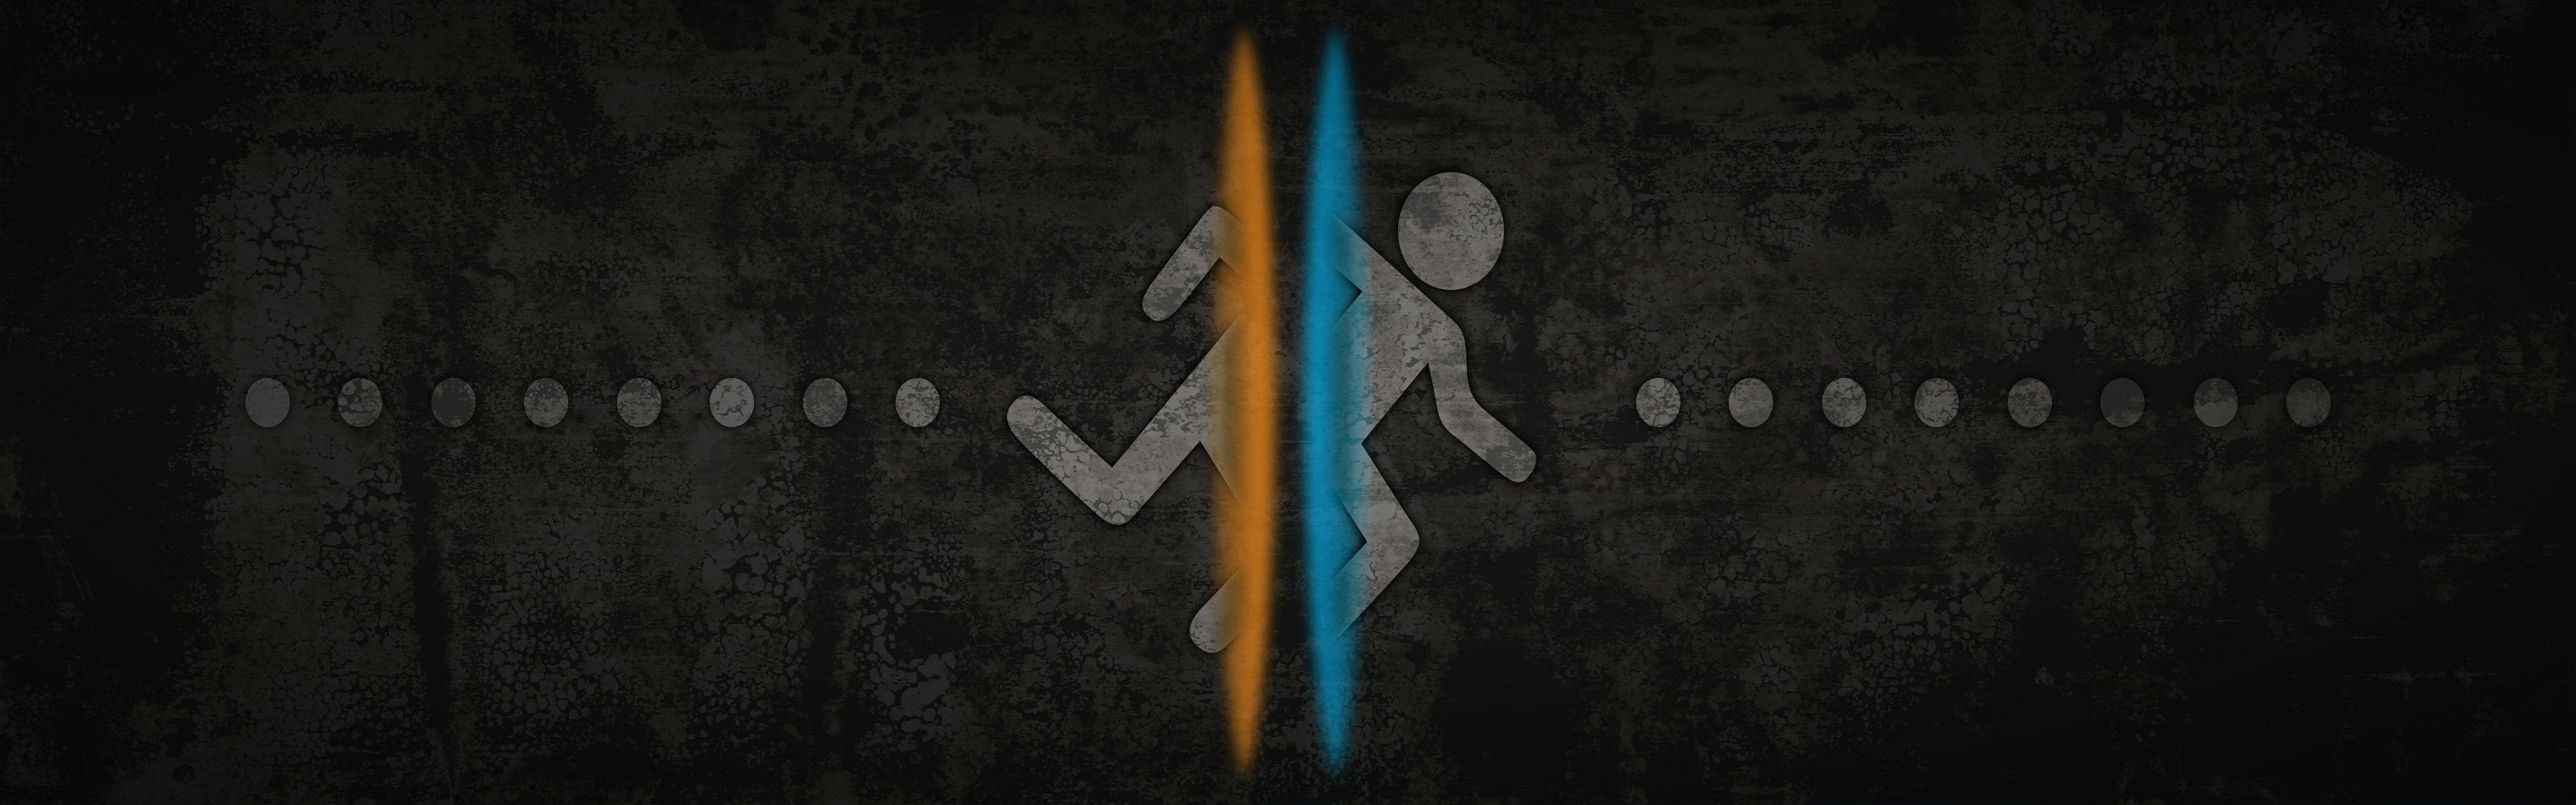 3840x1200 Just a dual monitor Portal wallpaper I made, enjoy and feel free Best  Desktop Backgrounds